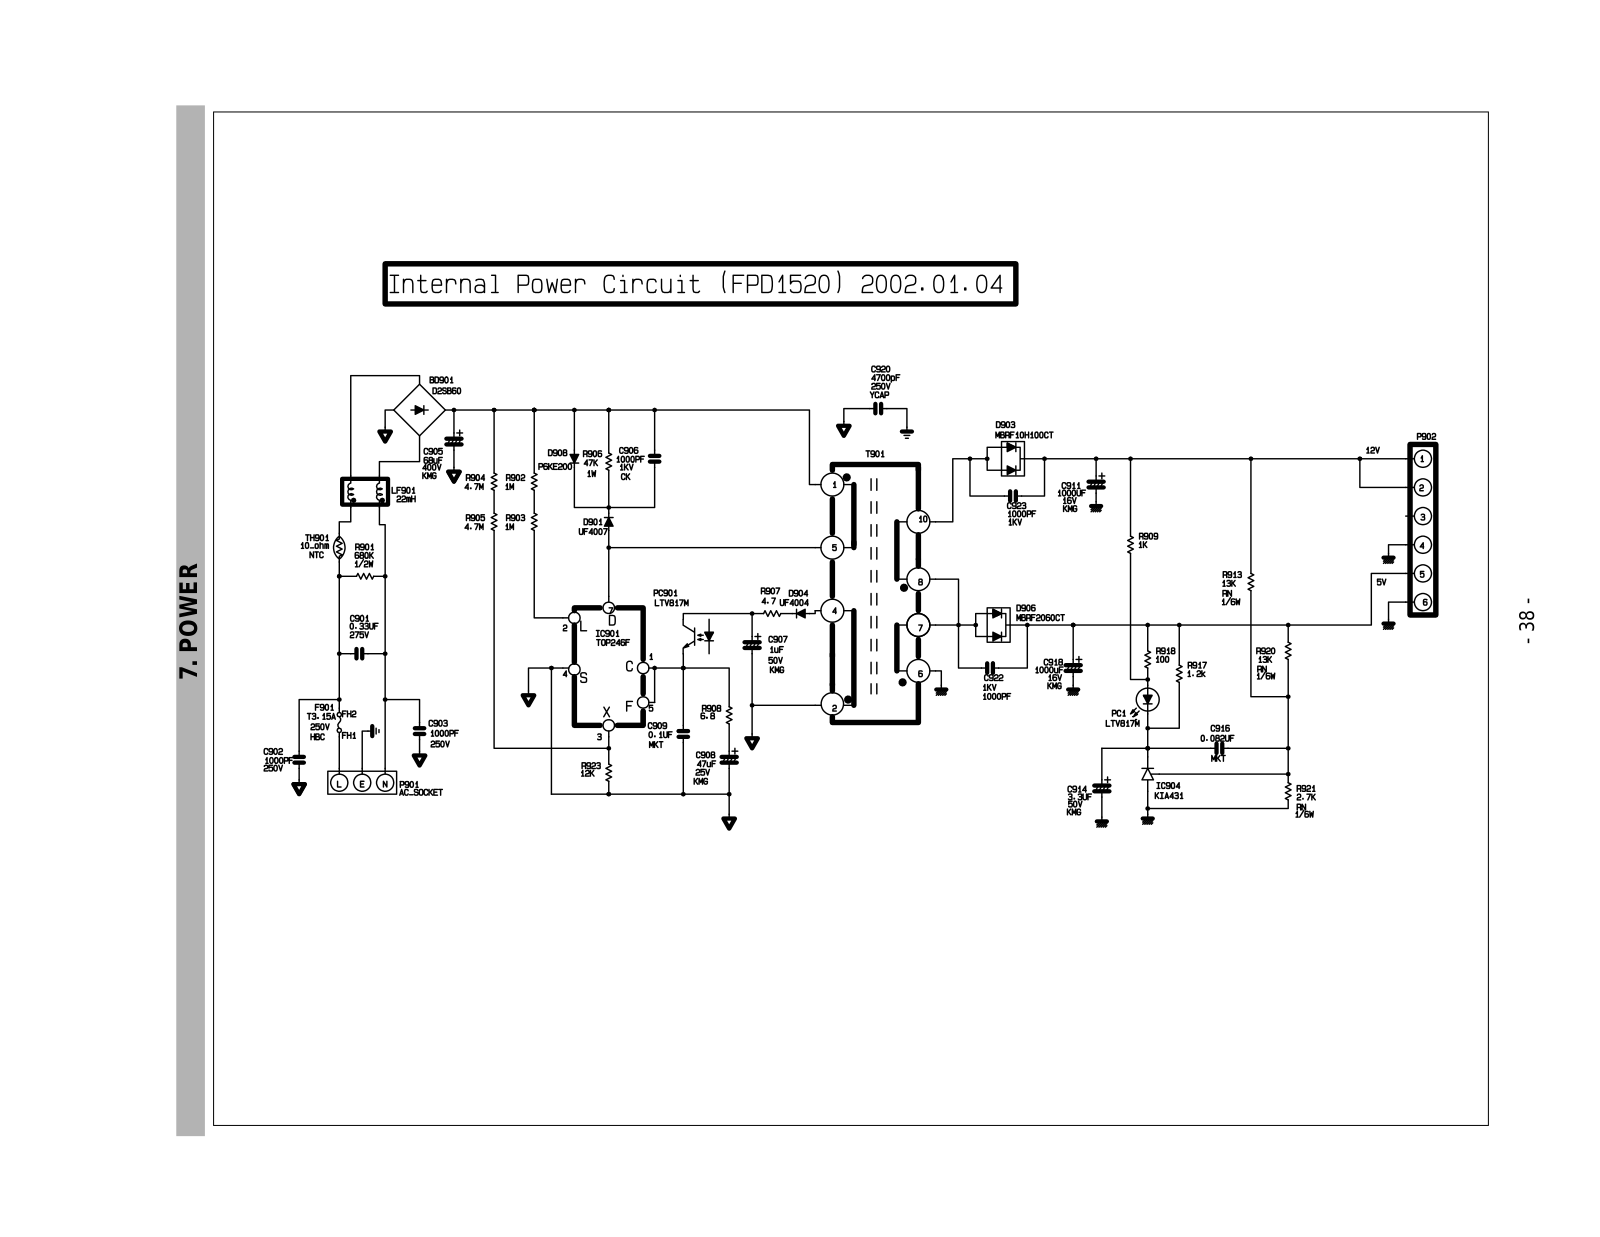 LG TOP246F, FPD1520 Schematic